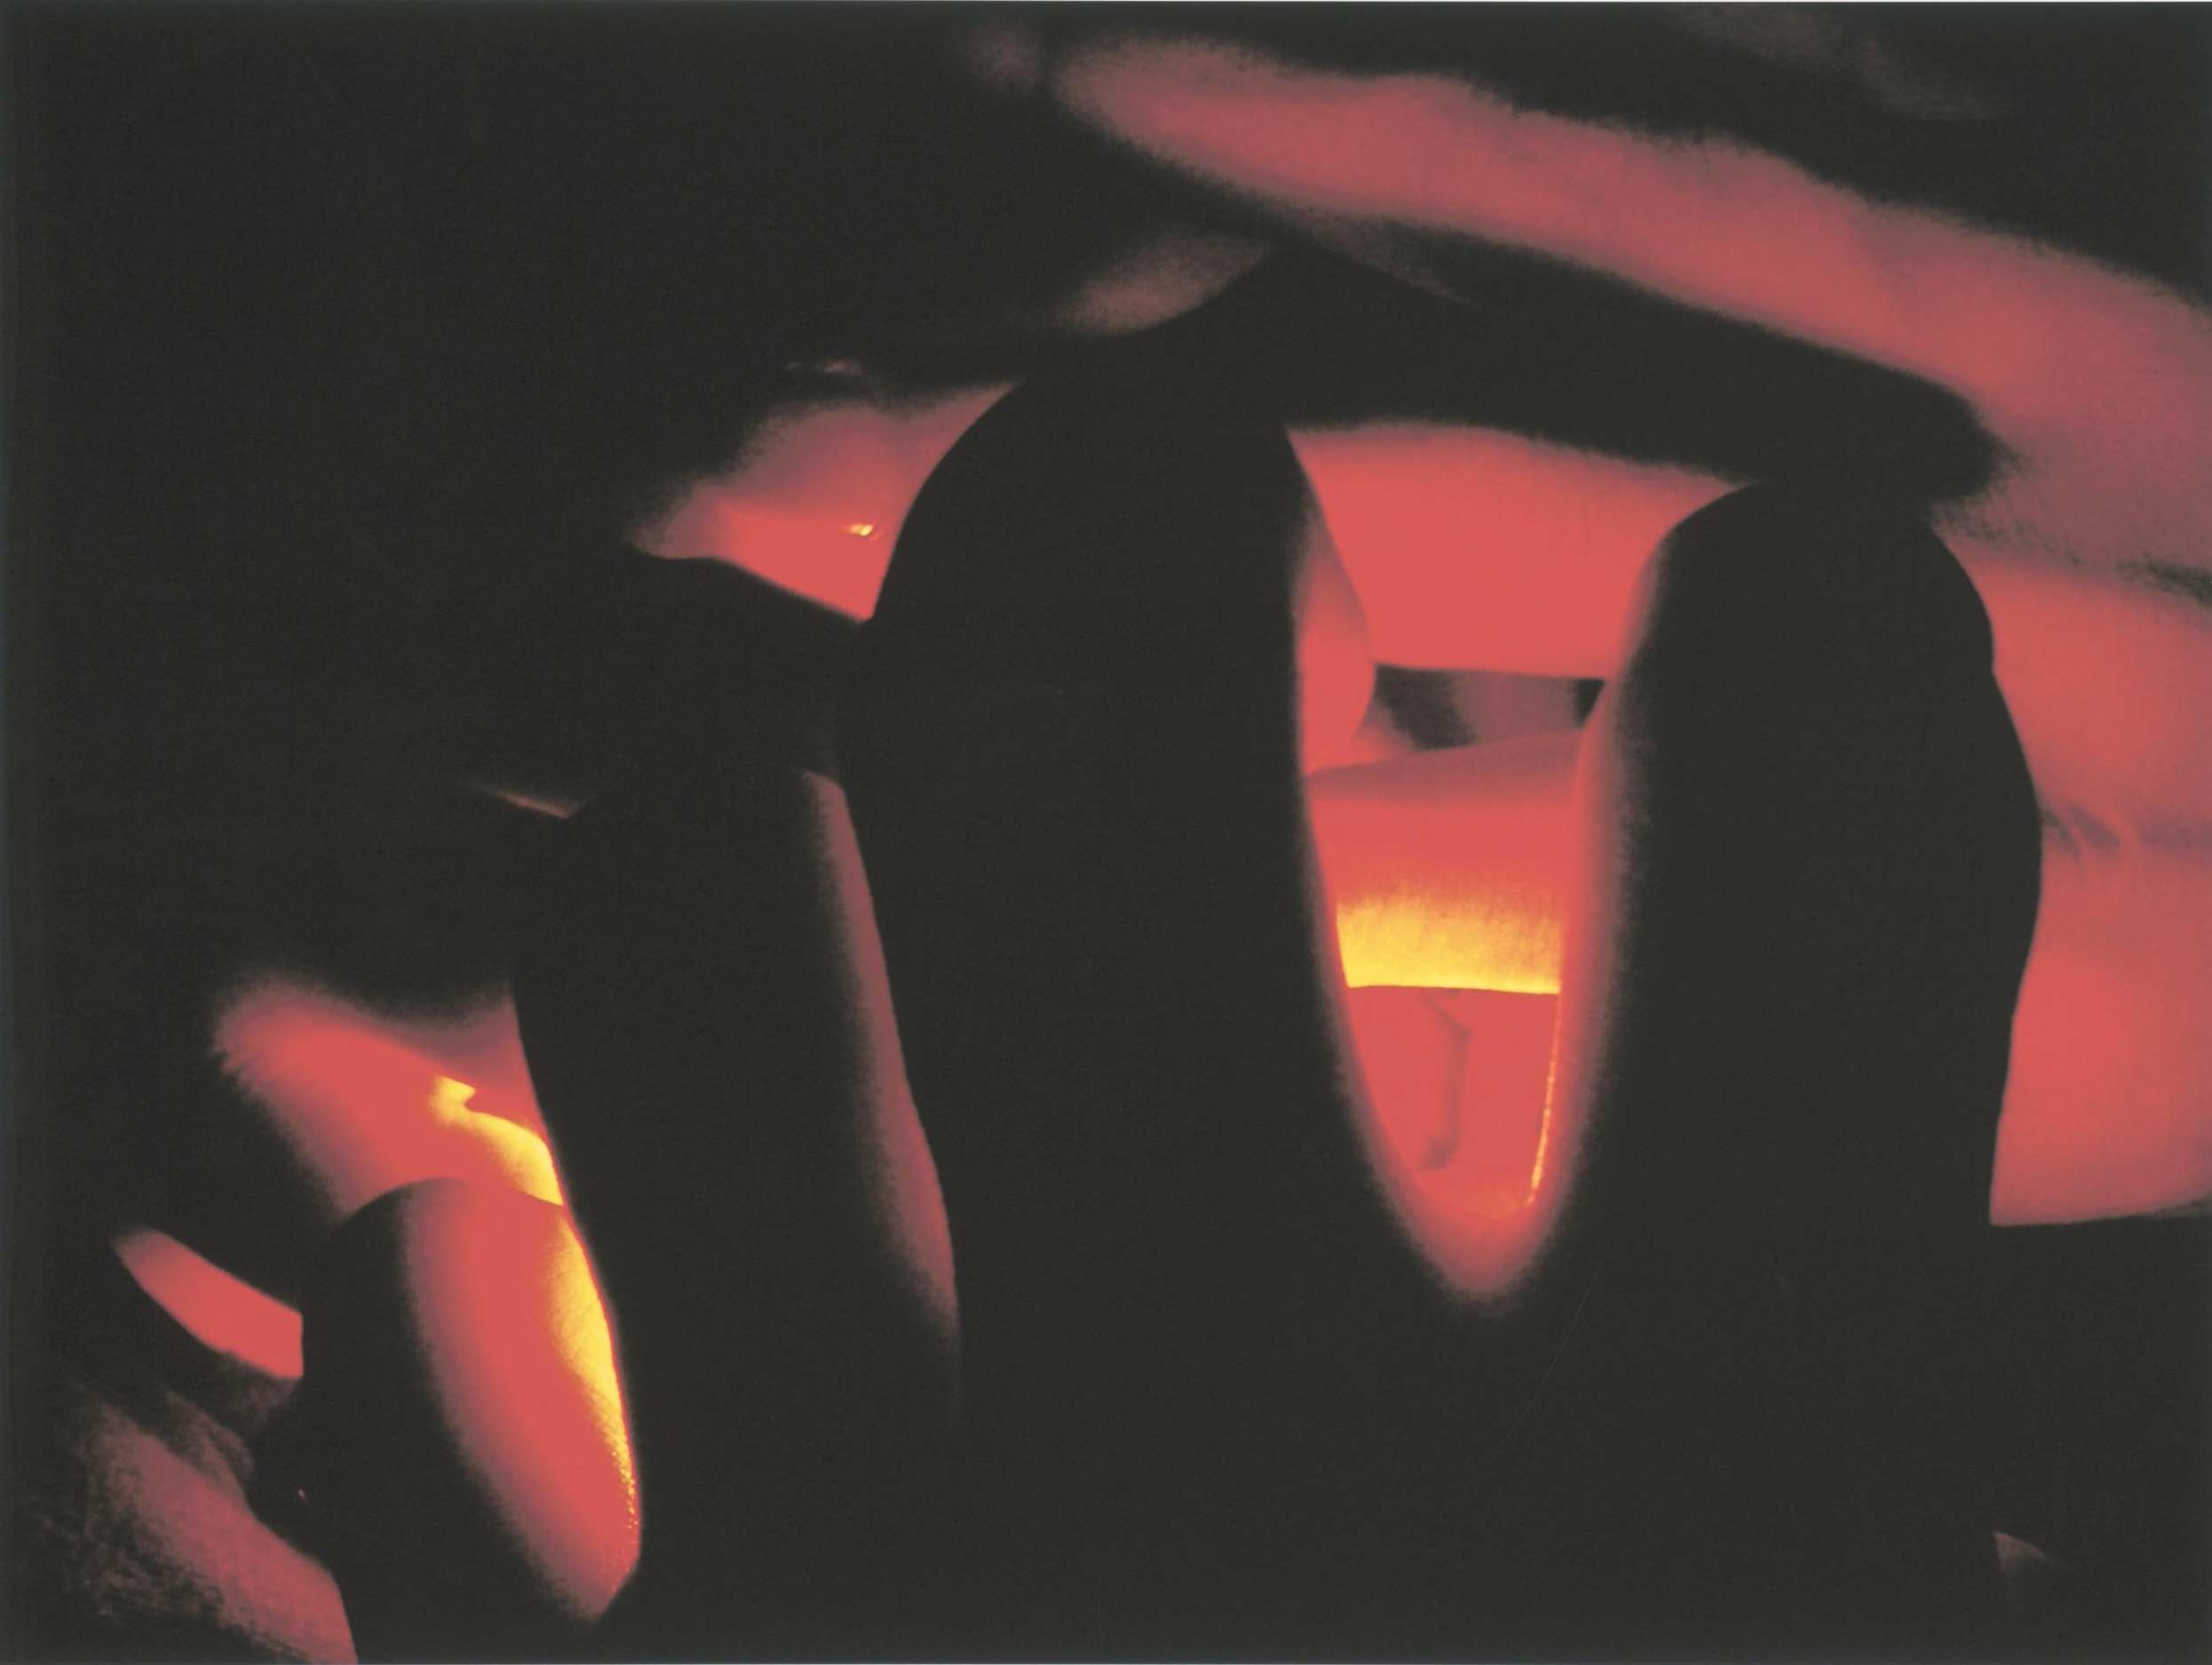 Nge Lay. 'Me and Another Process.' 2008–2009. Photograph. 91.4 x 121.9 cm. Collection of Singapore Art Museum.